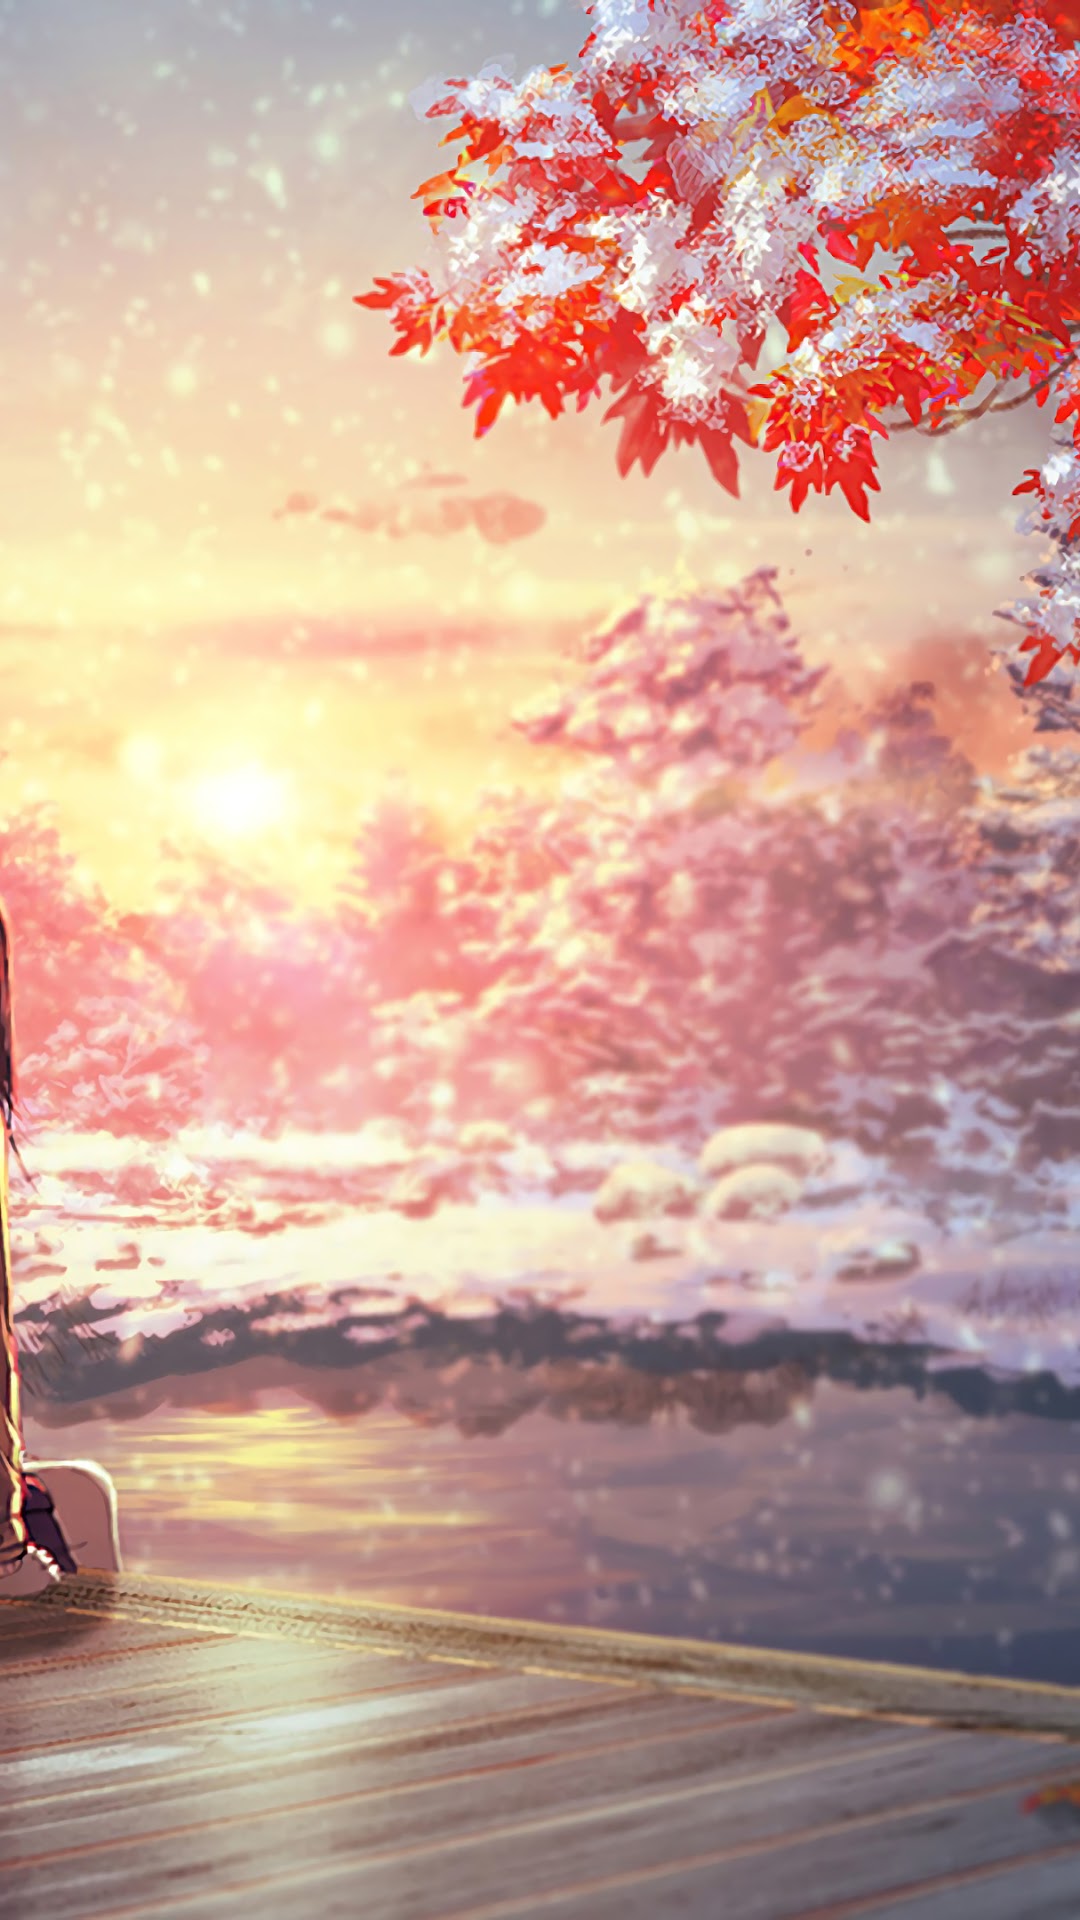 53+ Anime Scenery Wallpapers for iPhone and Android by Heidi Simmons